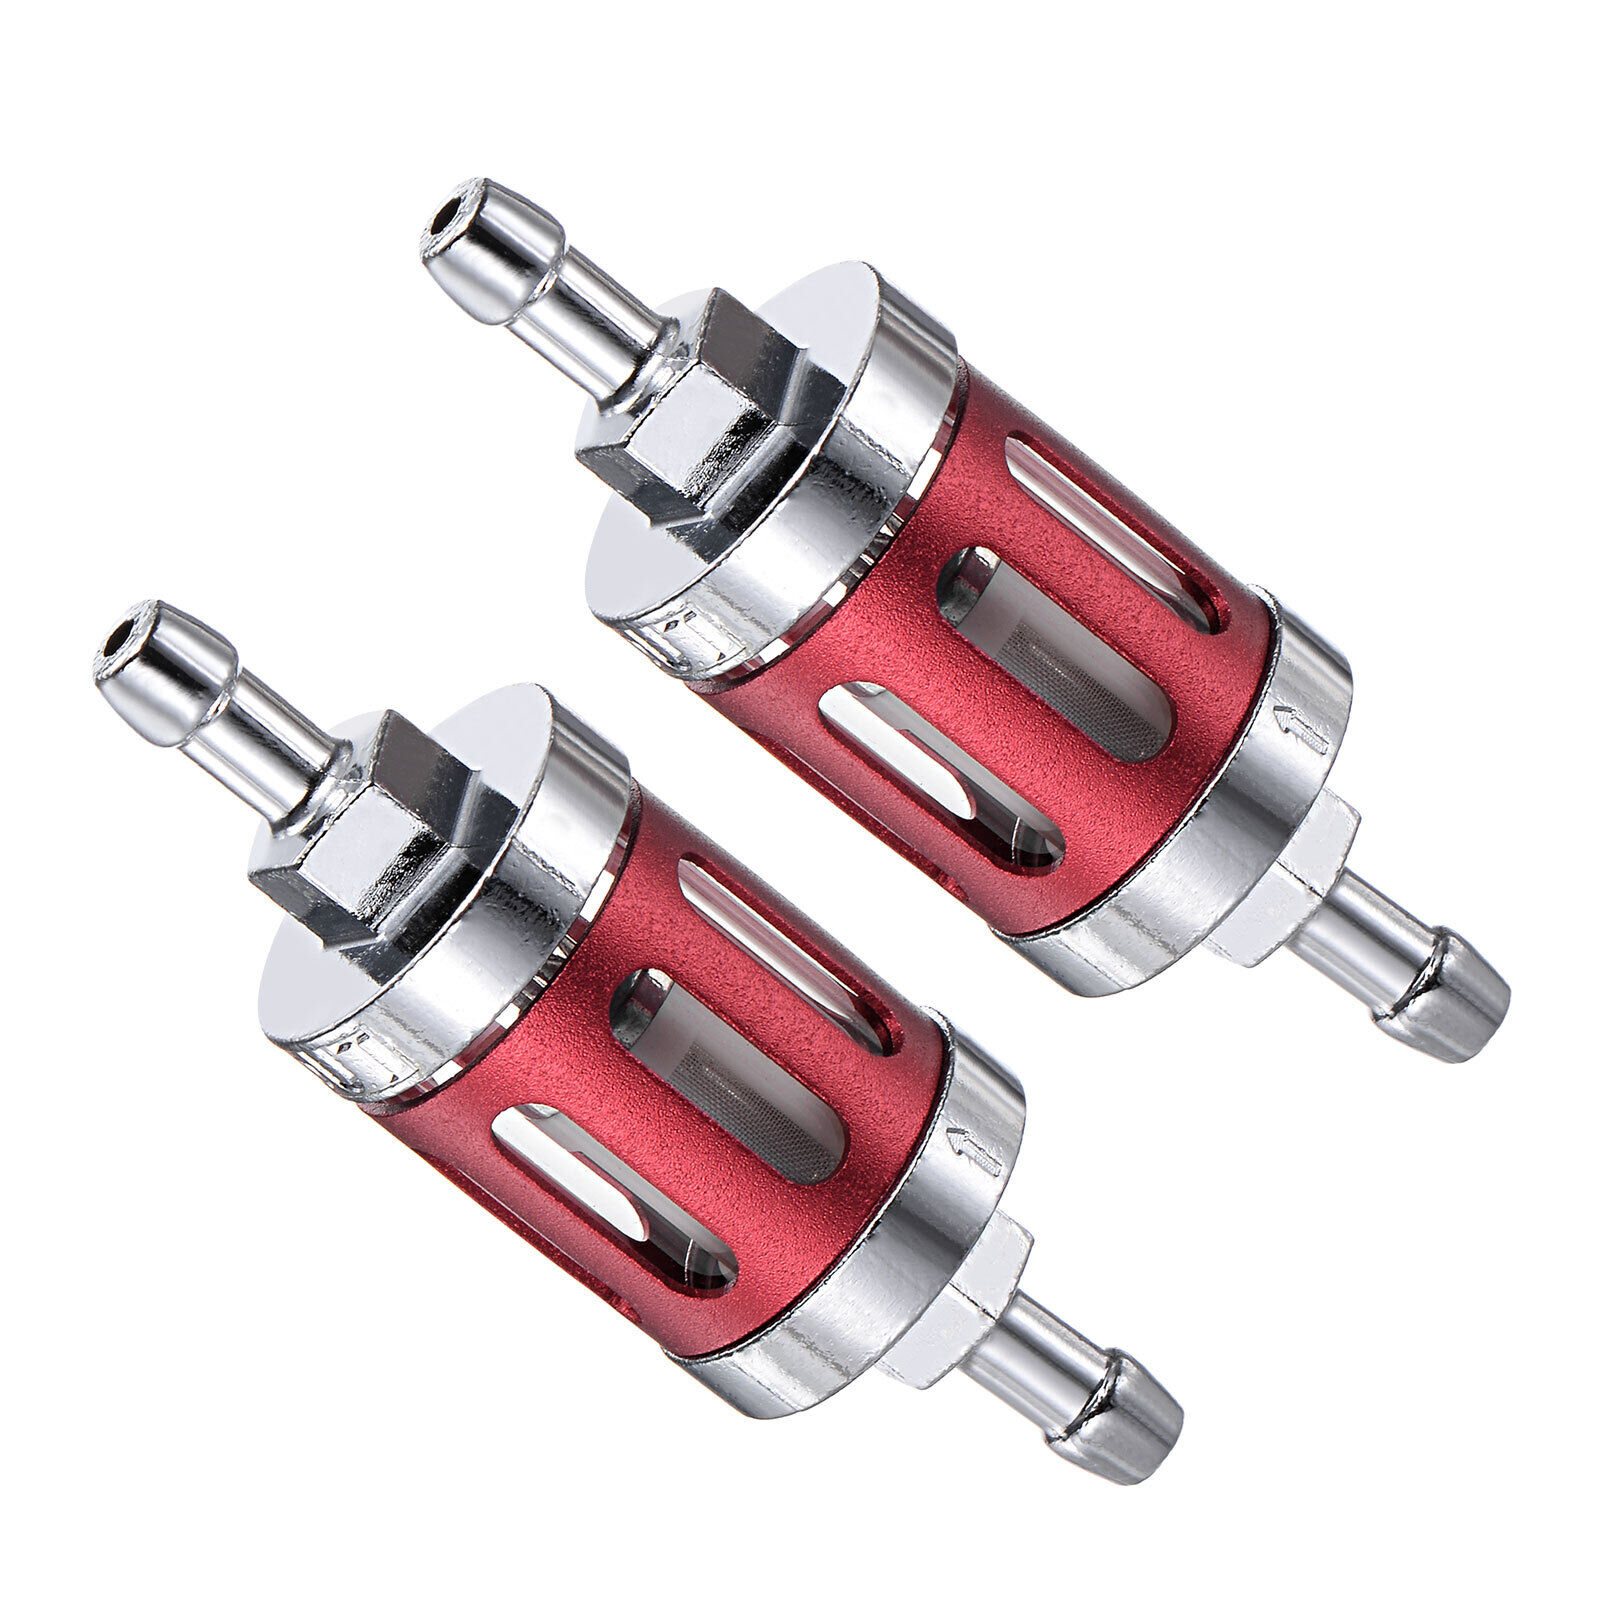 Universal Inline Petrol Gas Fuel Gasoline Oil Filter, Red, 2pcs